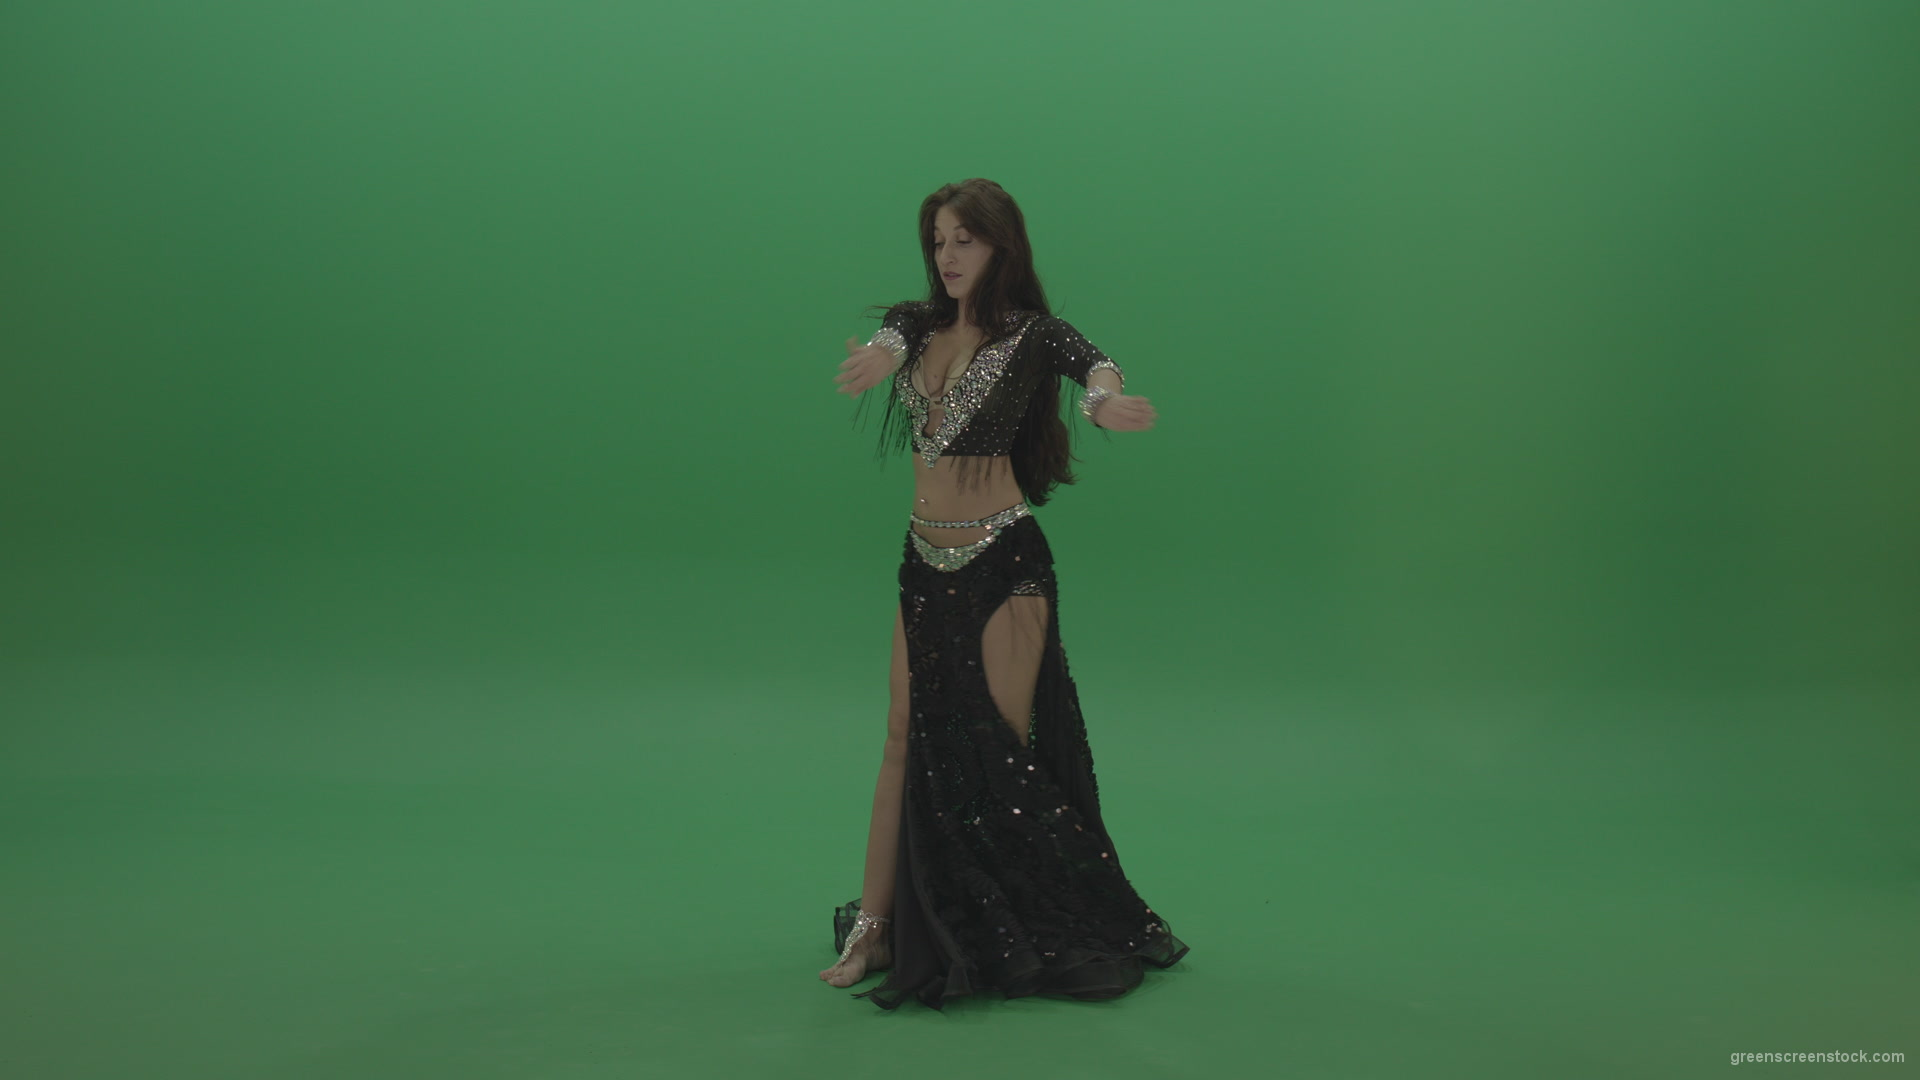 Adorable-belly-dancer-in-black-wear-display-amazing-dance-moves-over-chromakey-background_002 Green Screen Stock